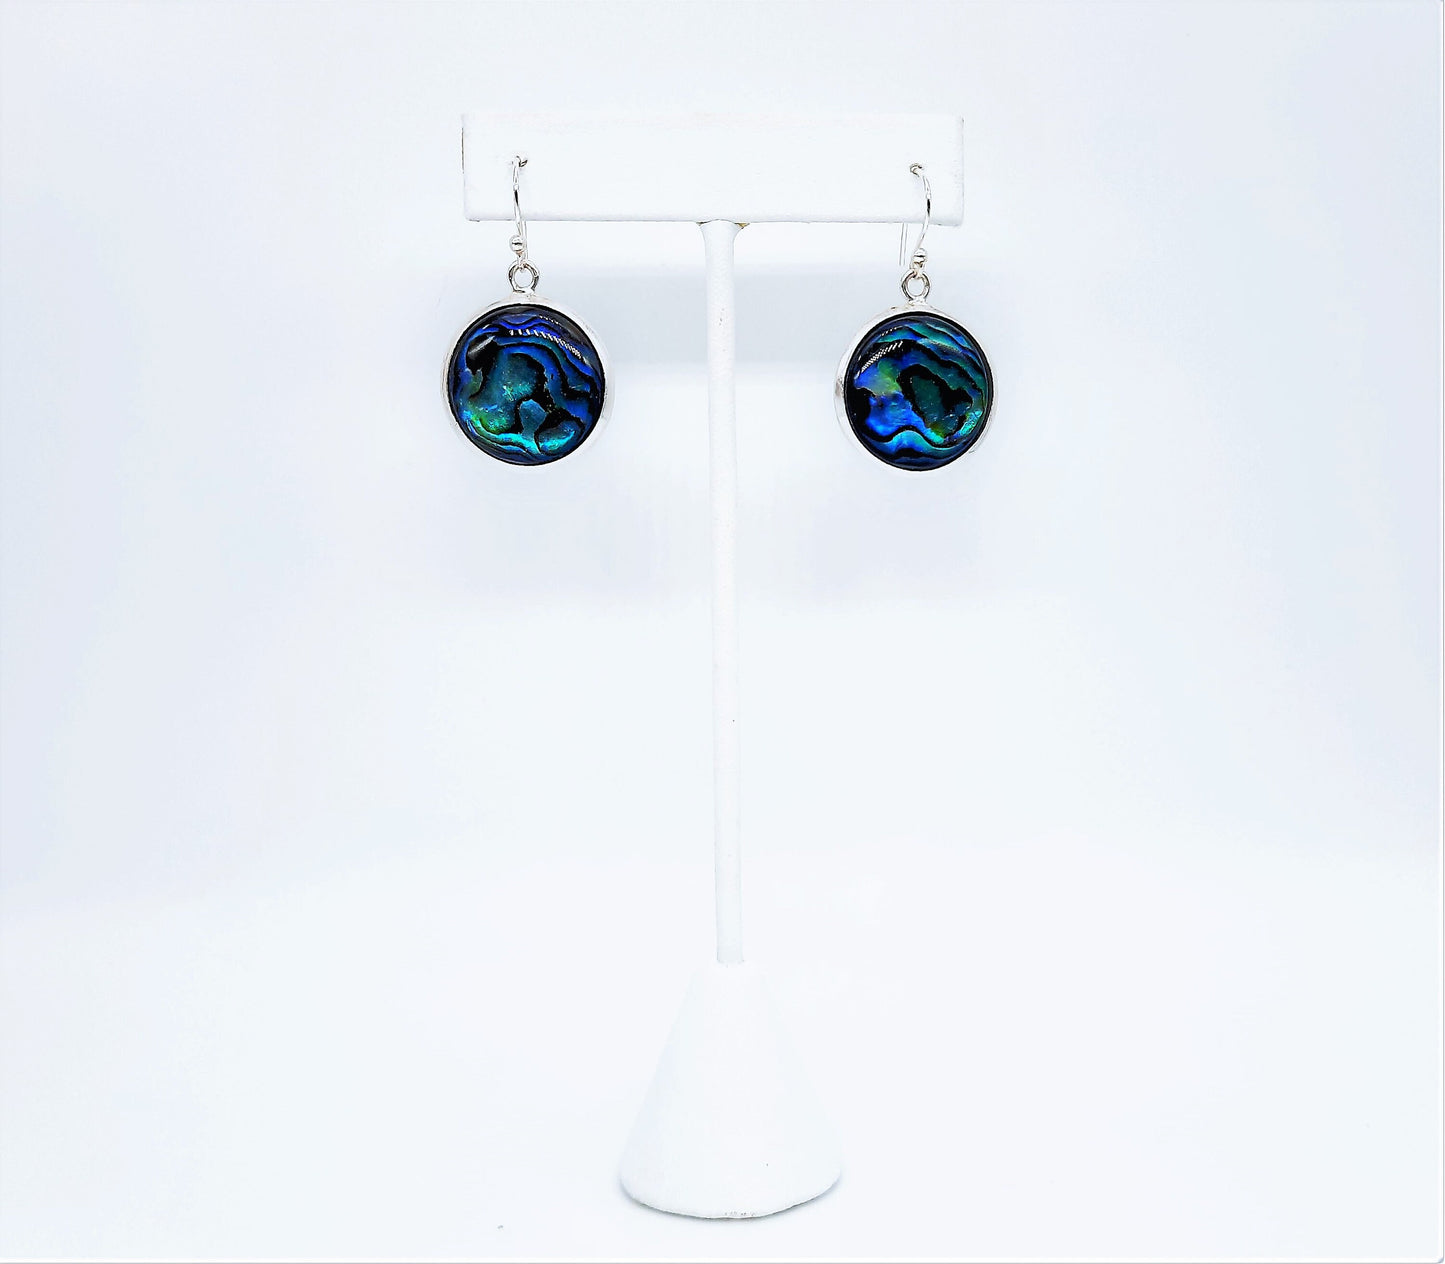 Handmade / Handcrafted 925 Sterling Silver Natural Blue Abalone / Paua Seashell Earrings, Sealed with Holographic Mica Infused Resin